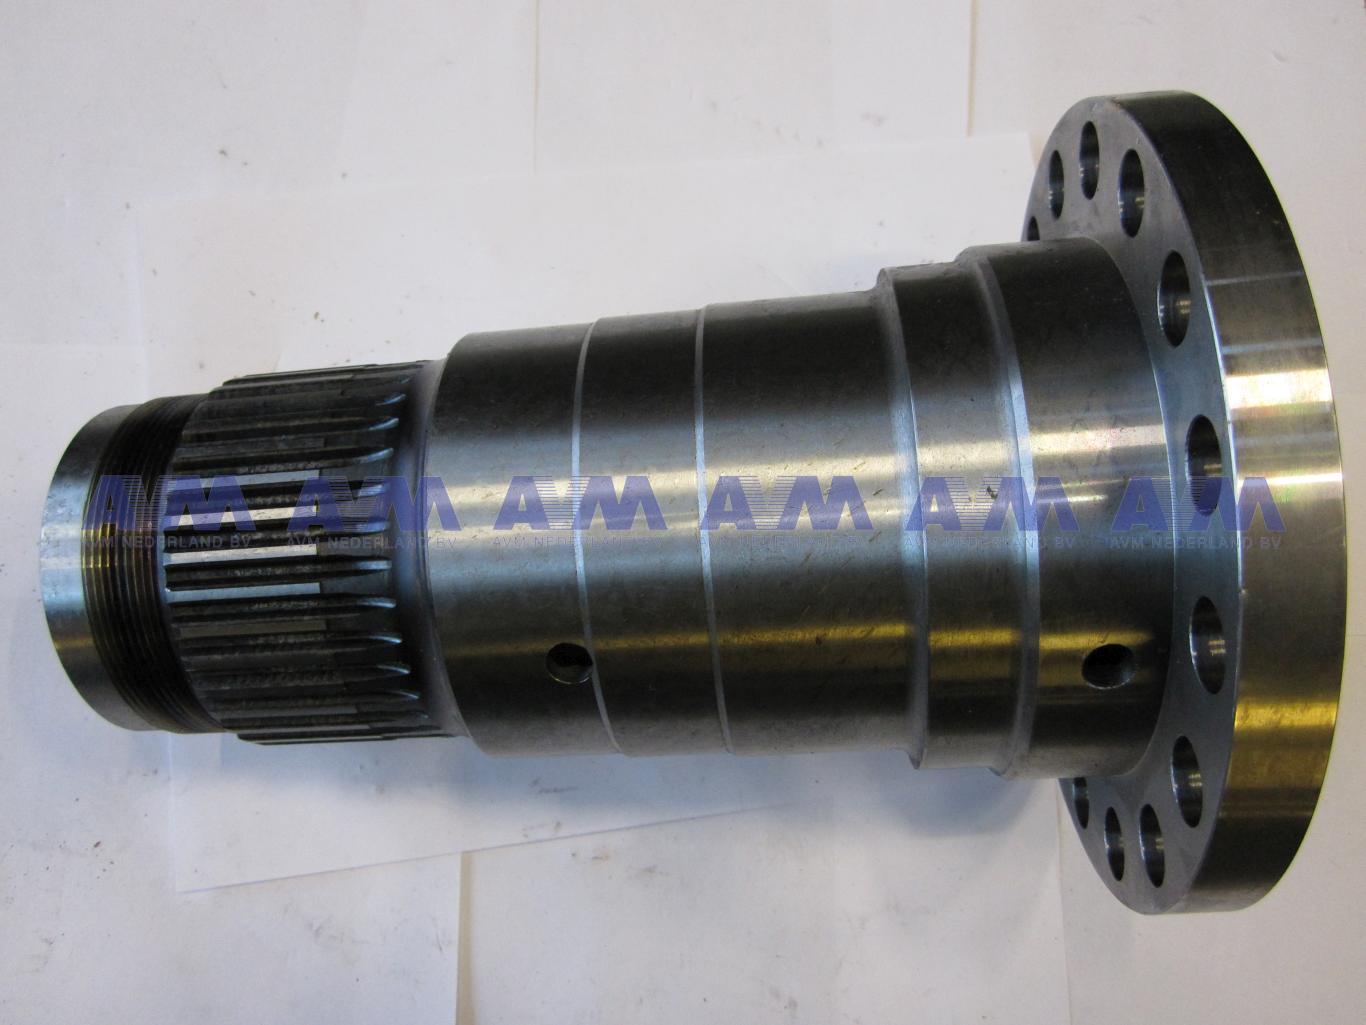 Astap Spindle